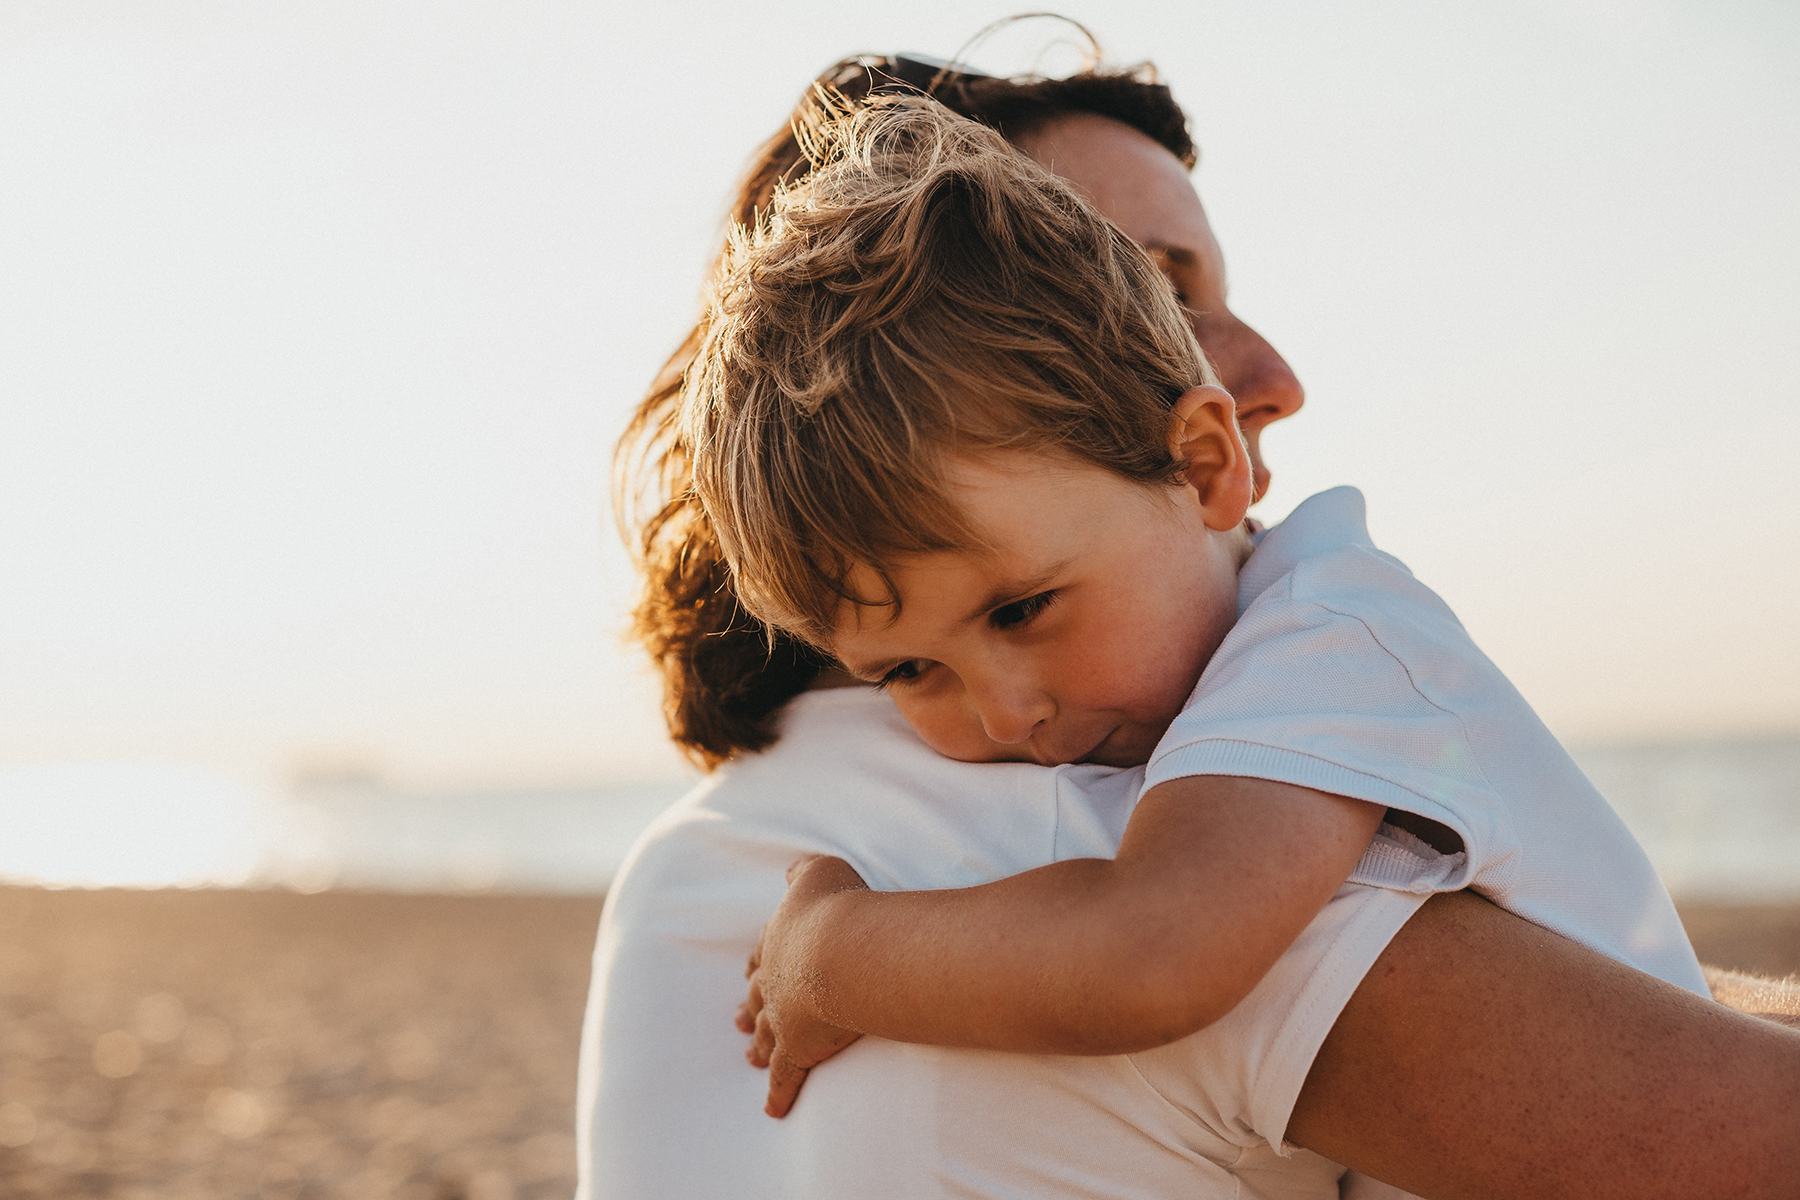 A stock photo of a woman hugging a little boy whilst they are on a beach.